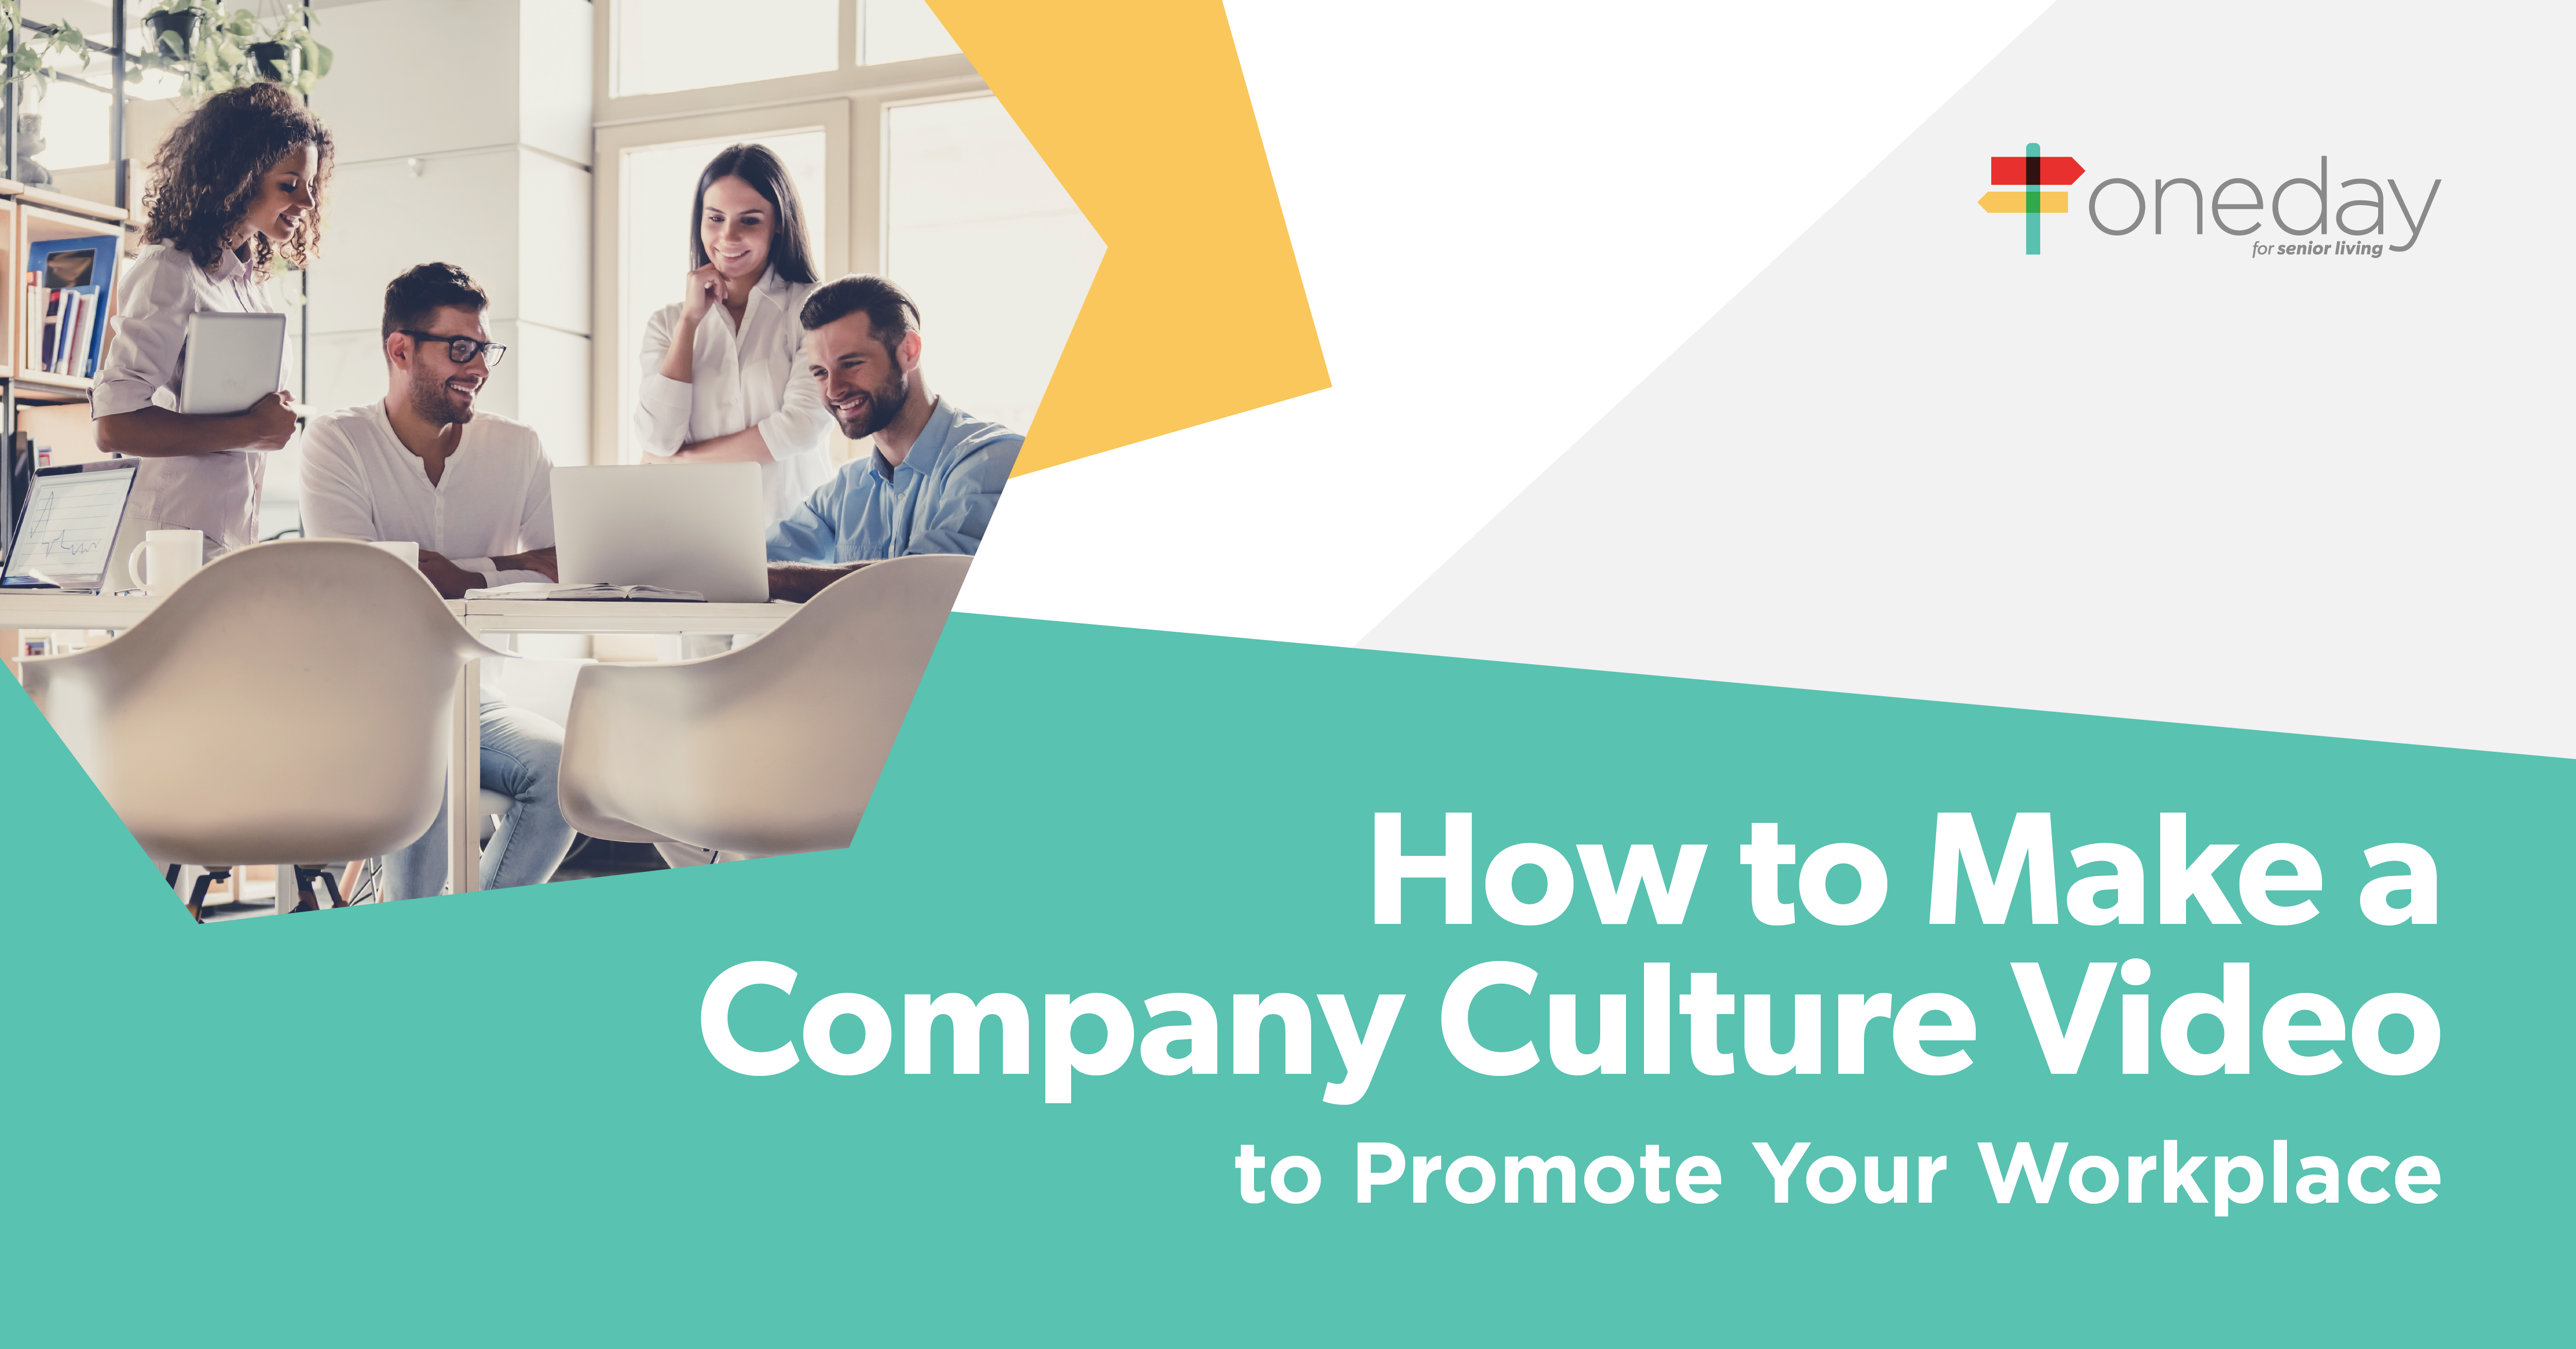 Insights and best practices on creating a compelling company culture video for your senior living community that will help you retain and attract key talent.